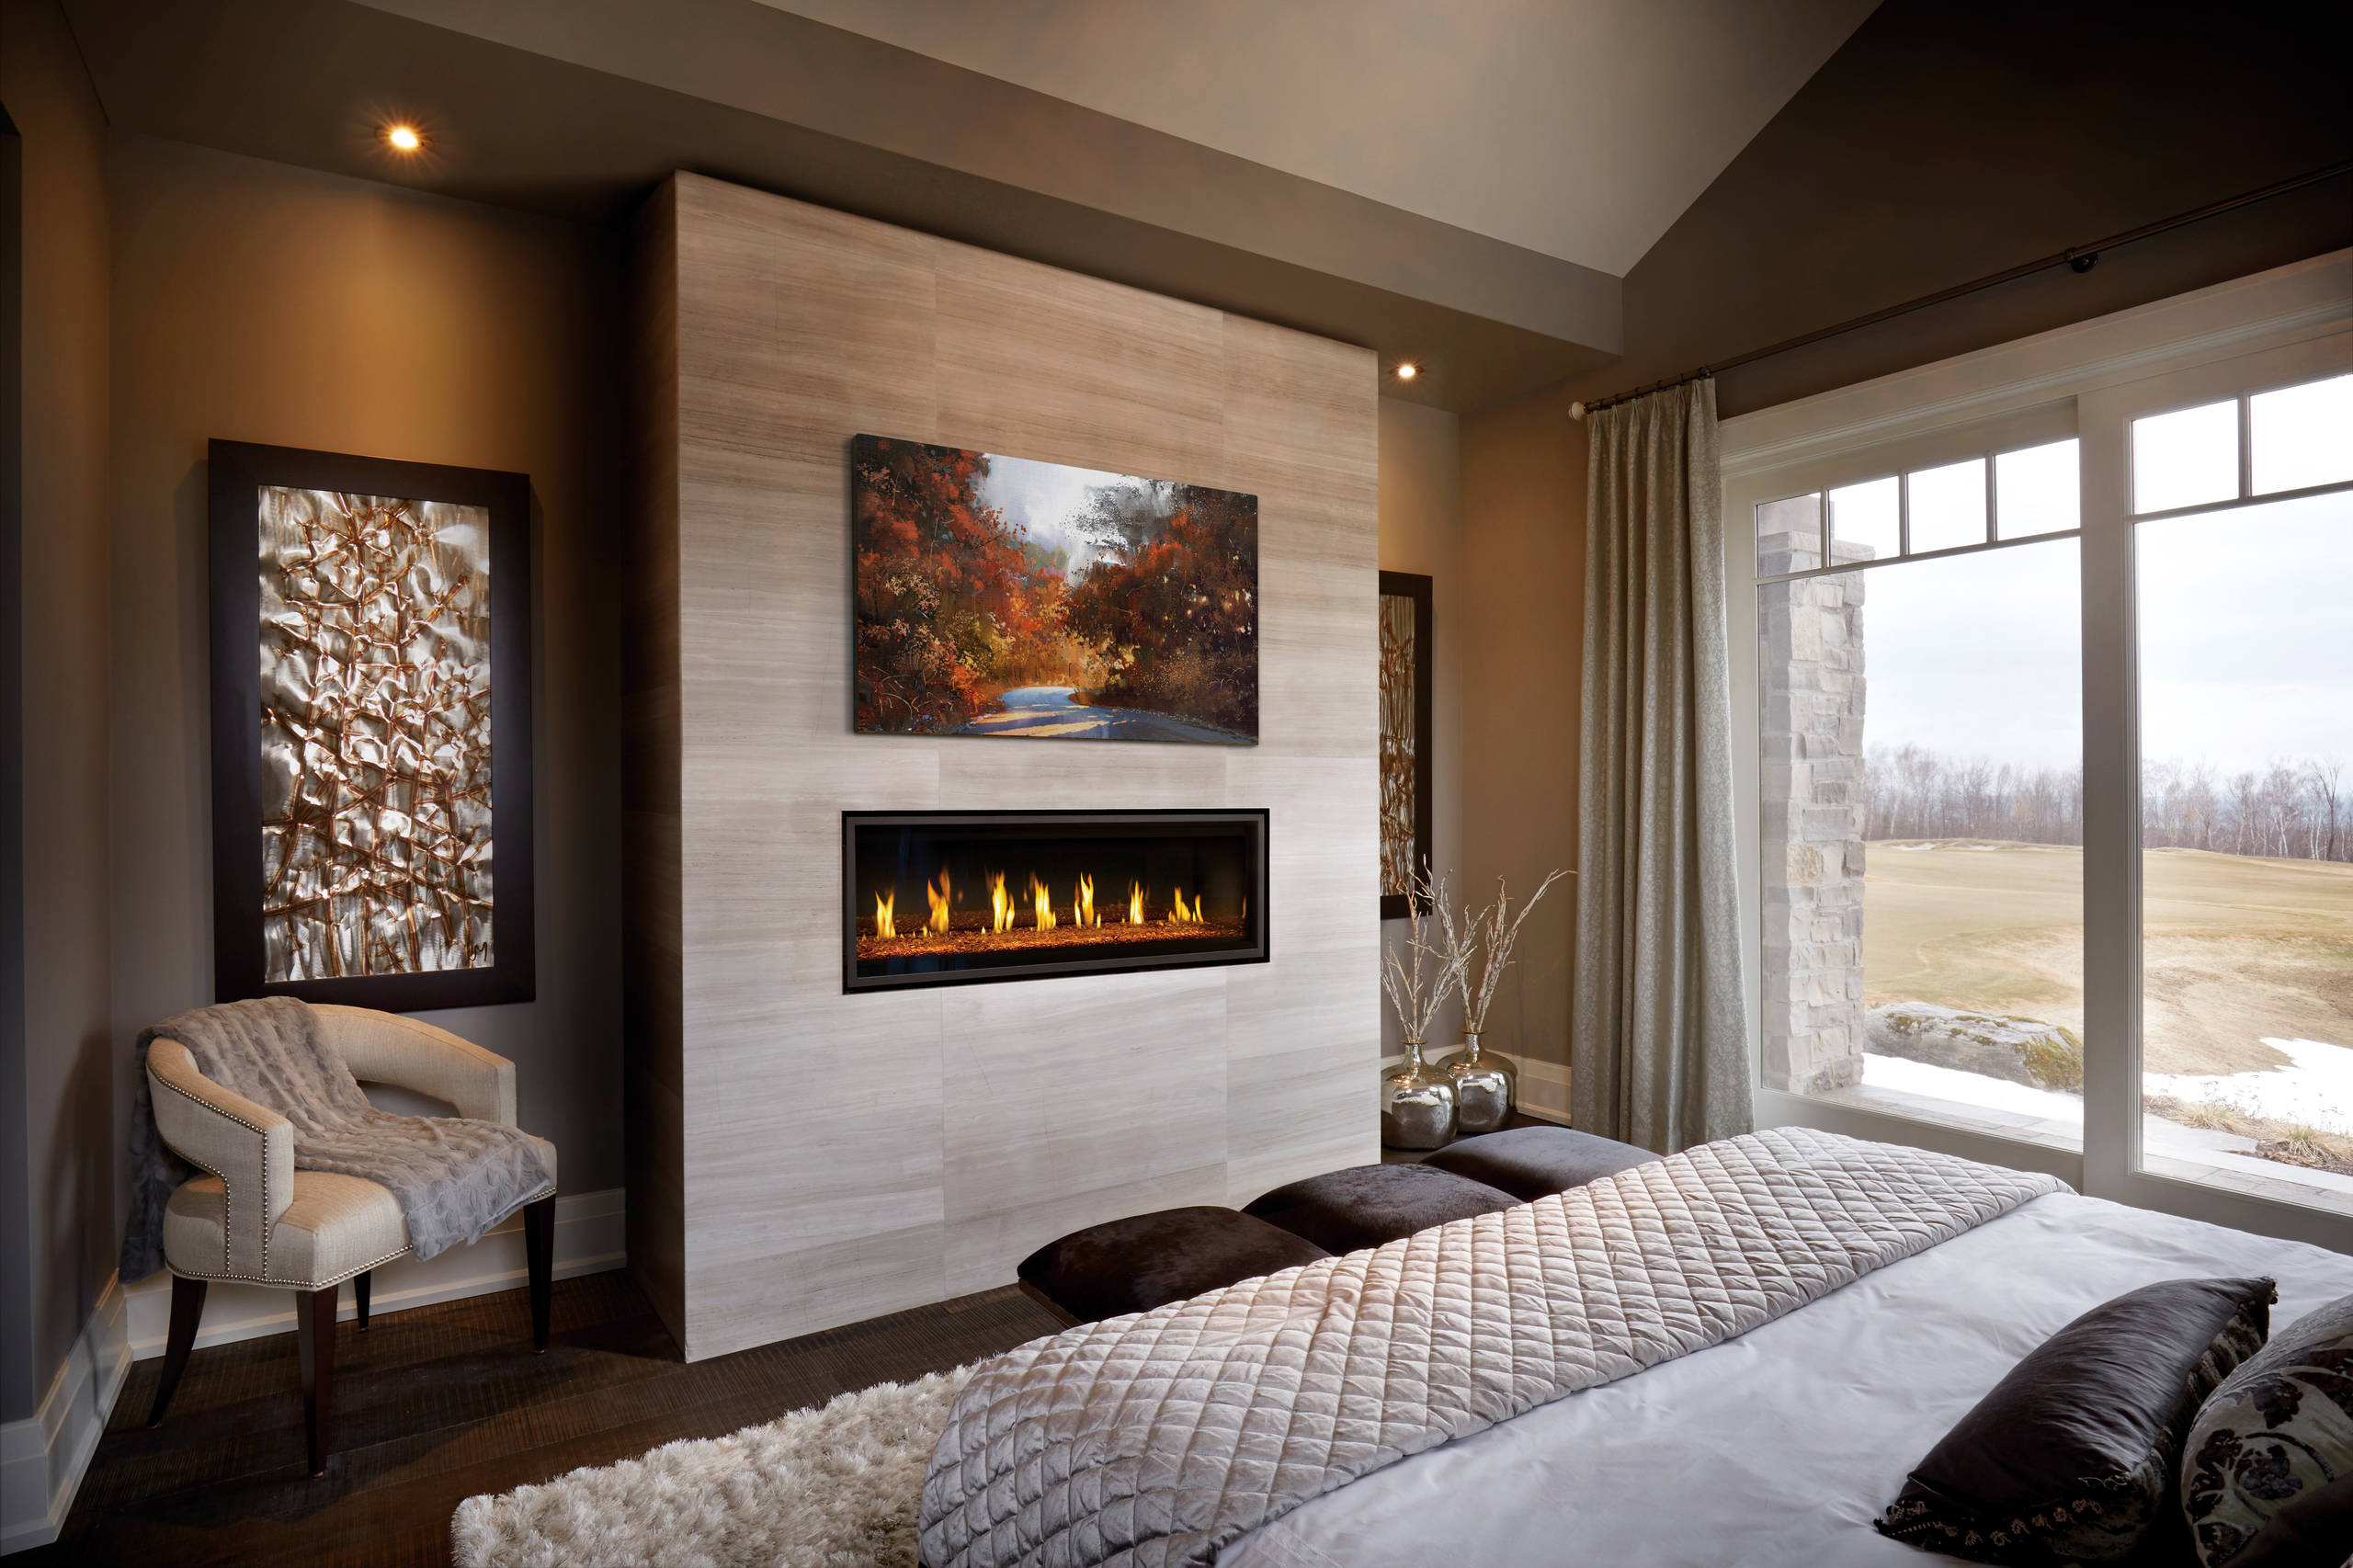 Standard Fireplace Pictures Ideas, Modern Living Room Fireplaces